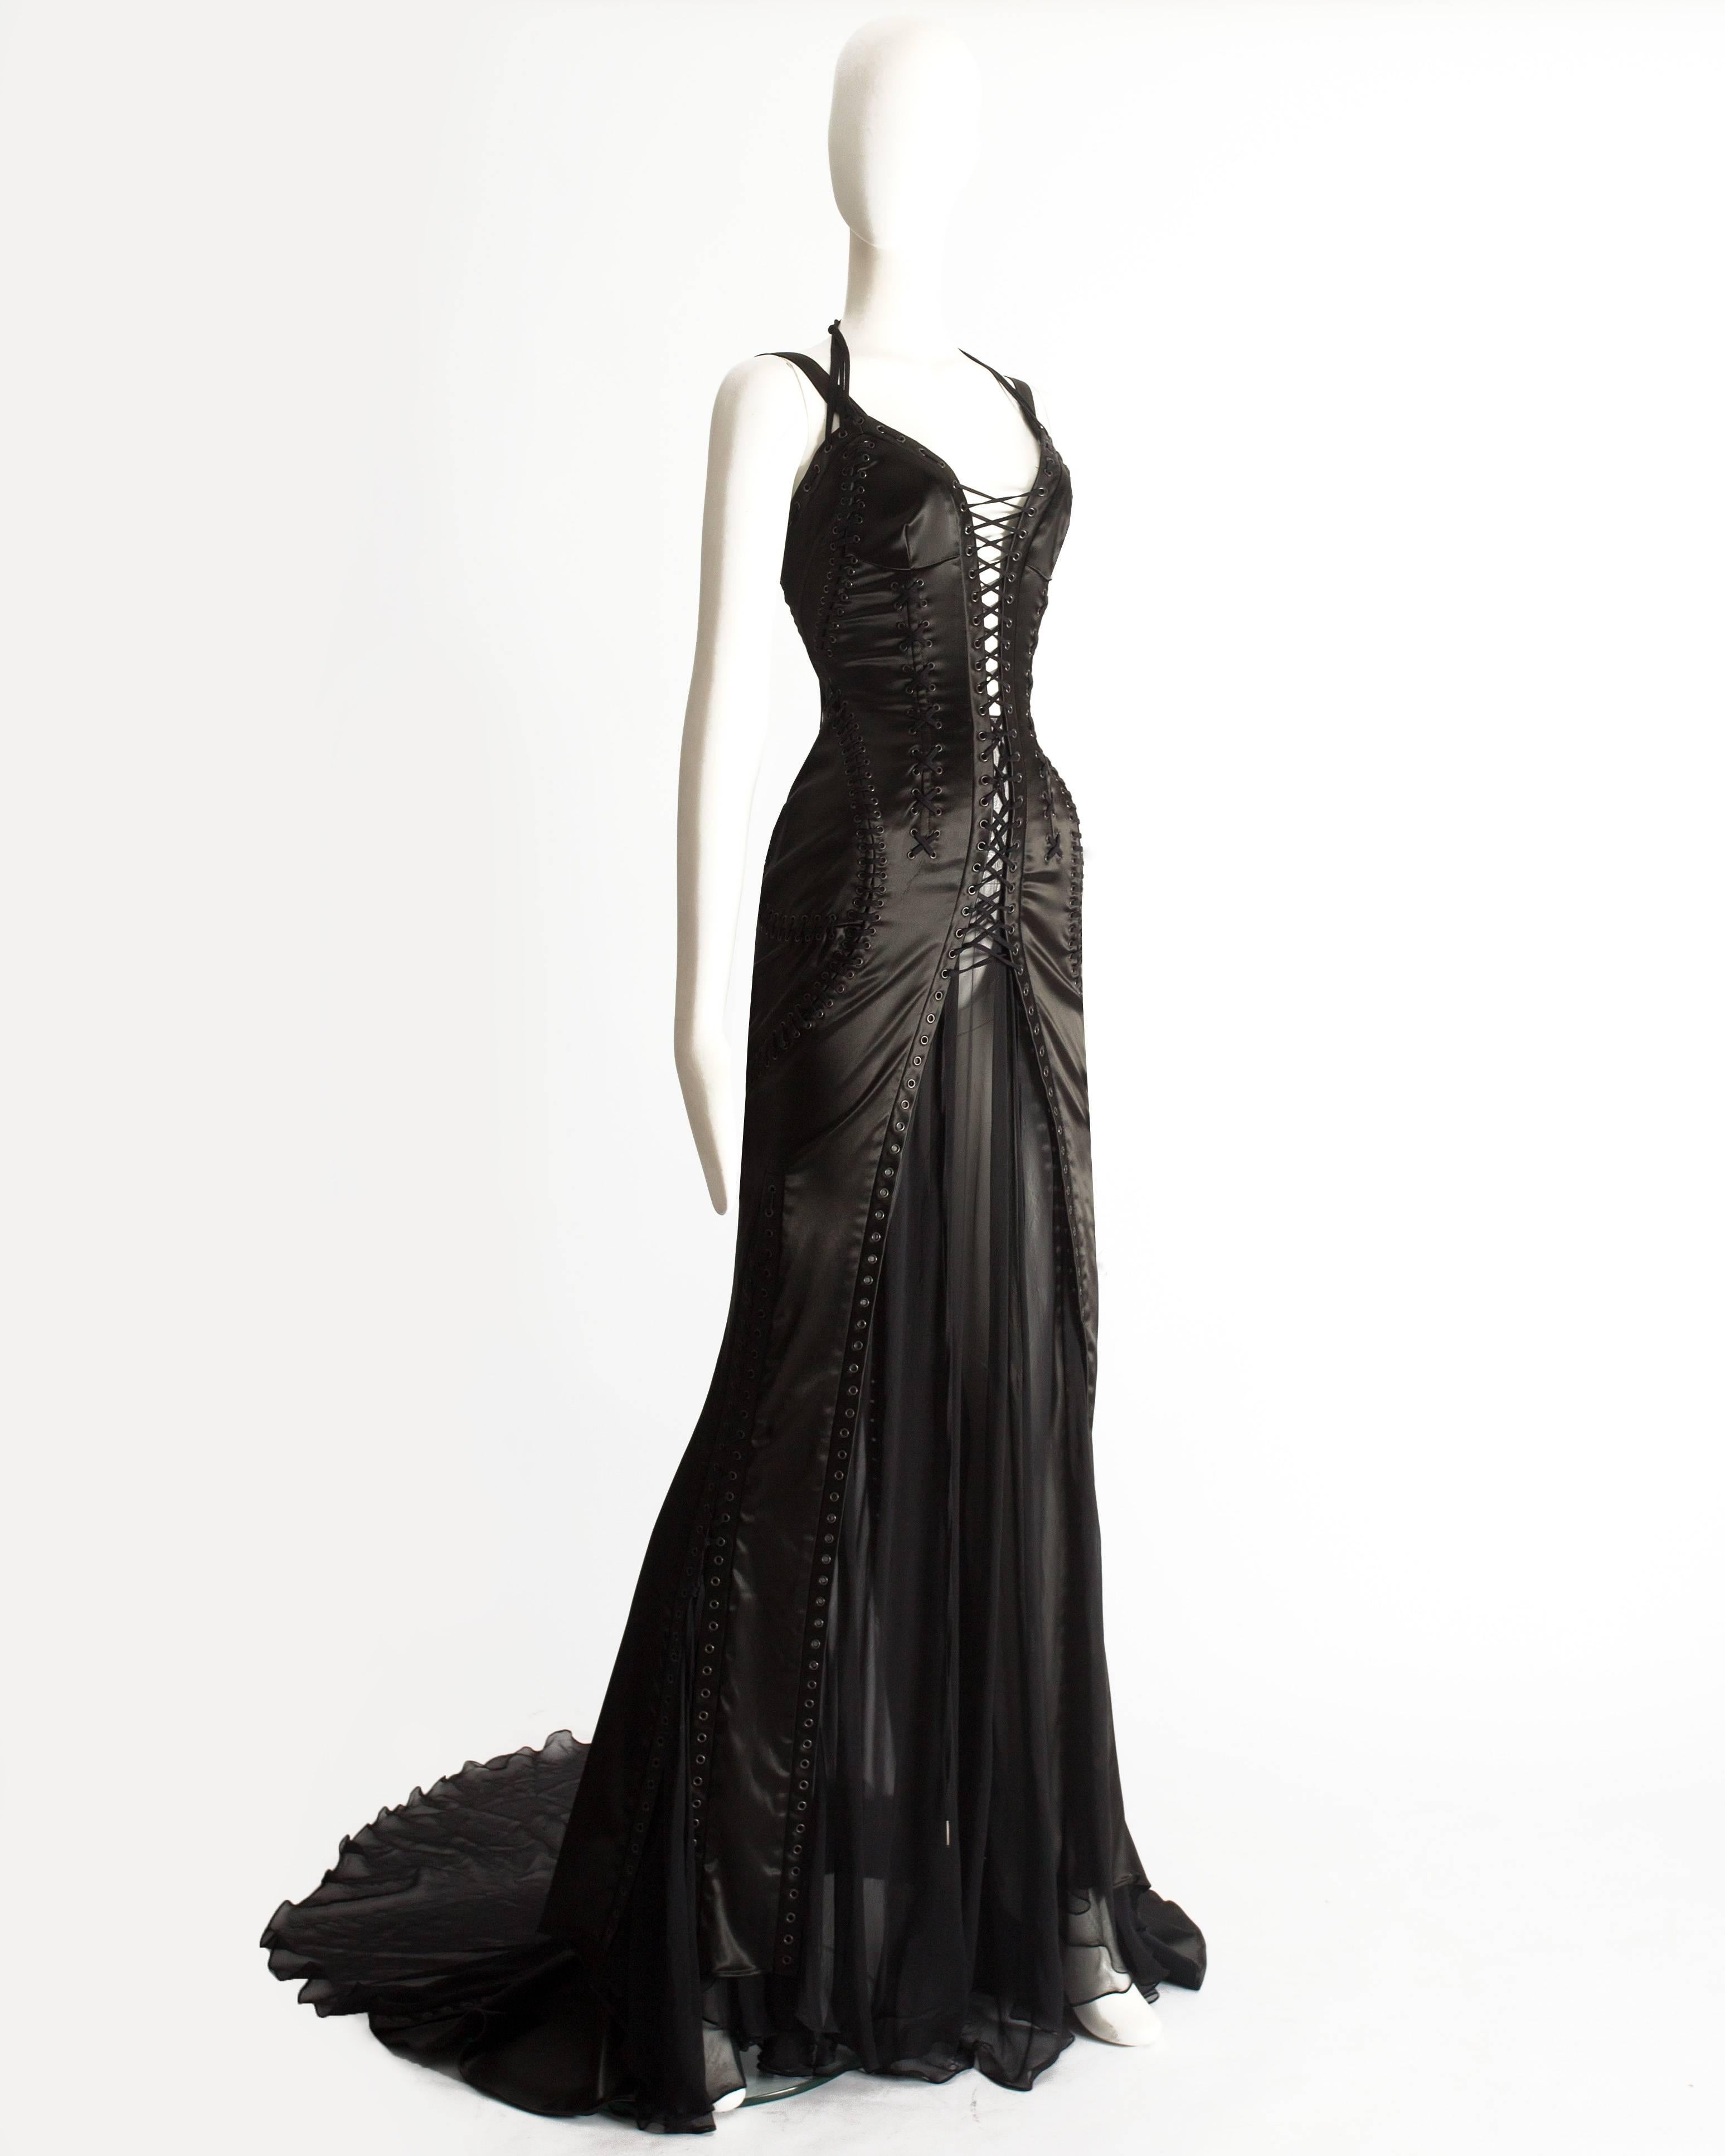 Dolce & Gabbana black satin full length lace up evening gown, Autumn-Winter 2003